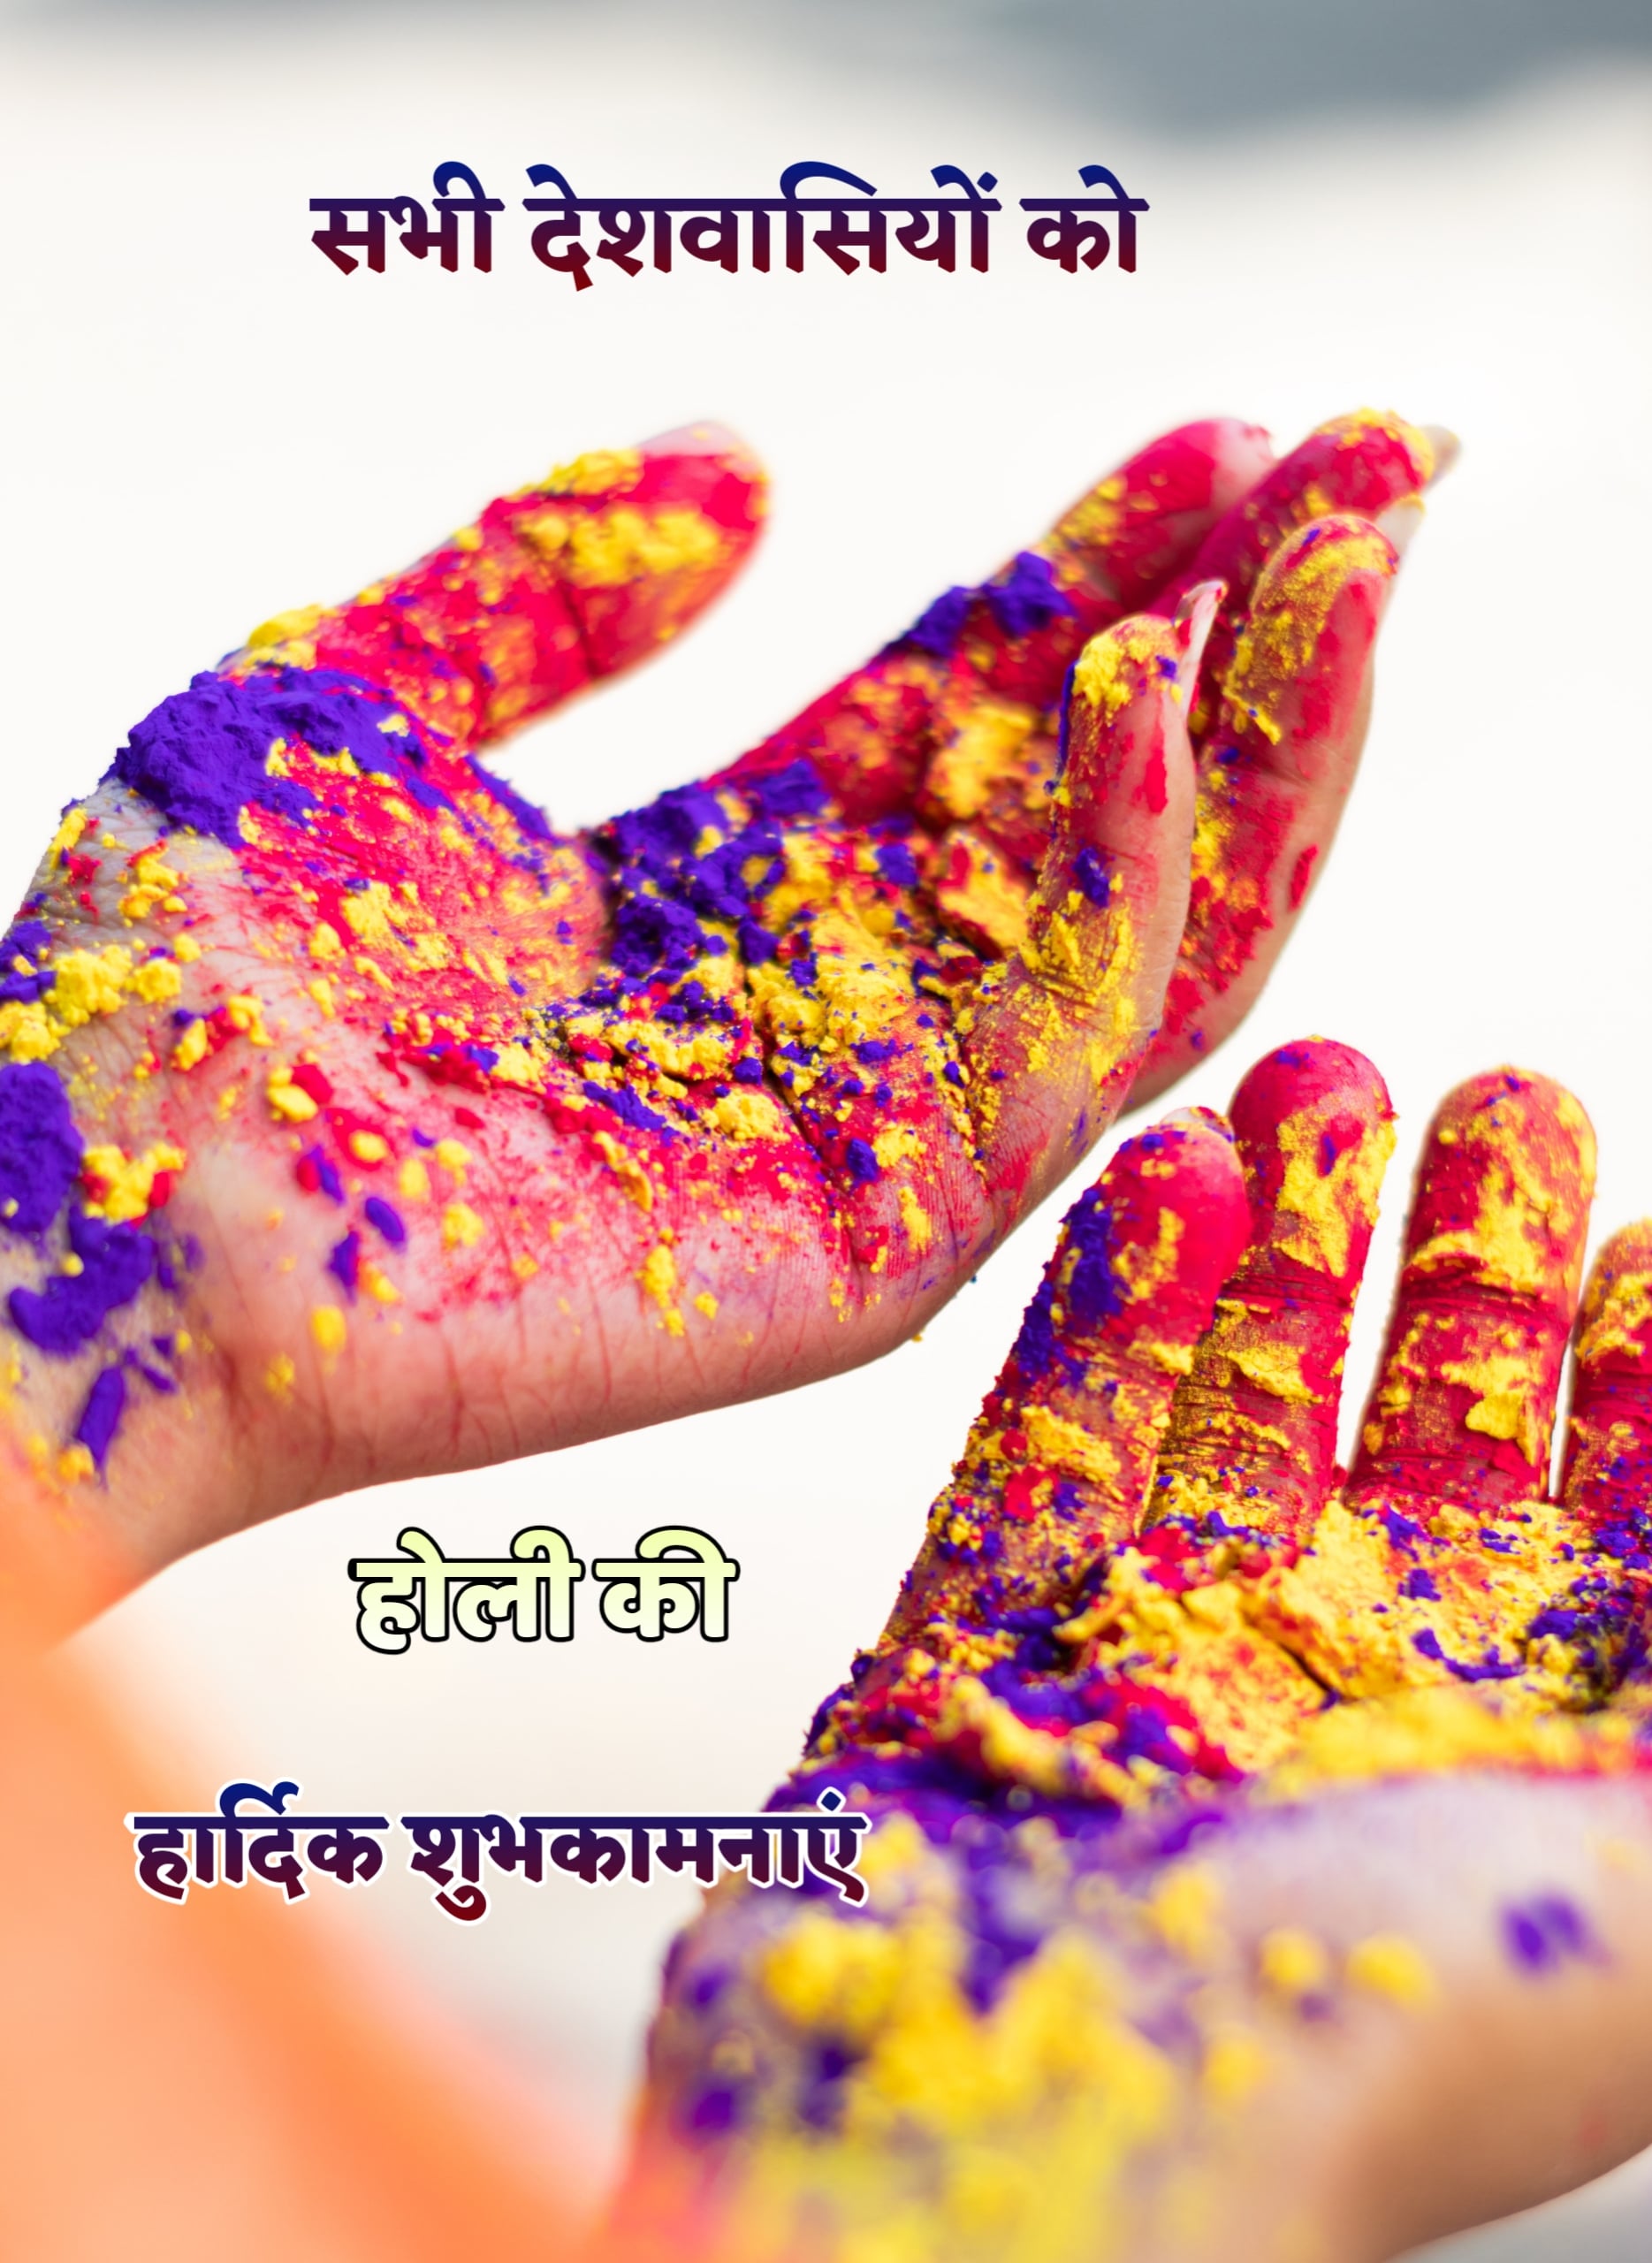 Holi Festival Image With Blue And Yellow Color Hand